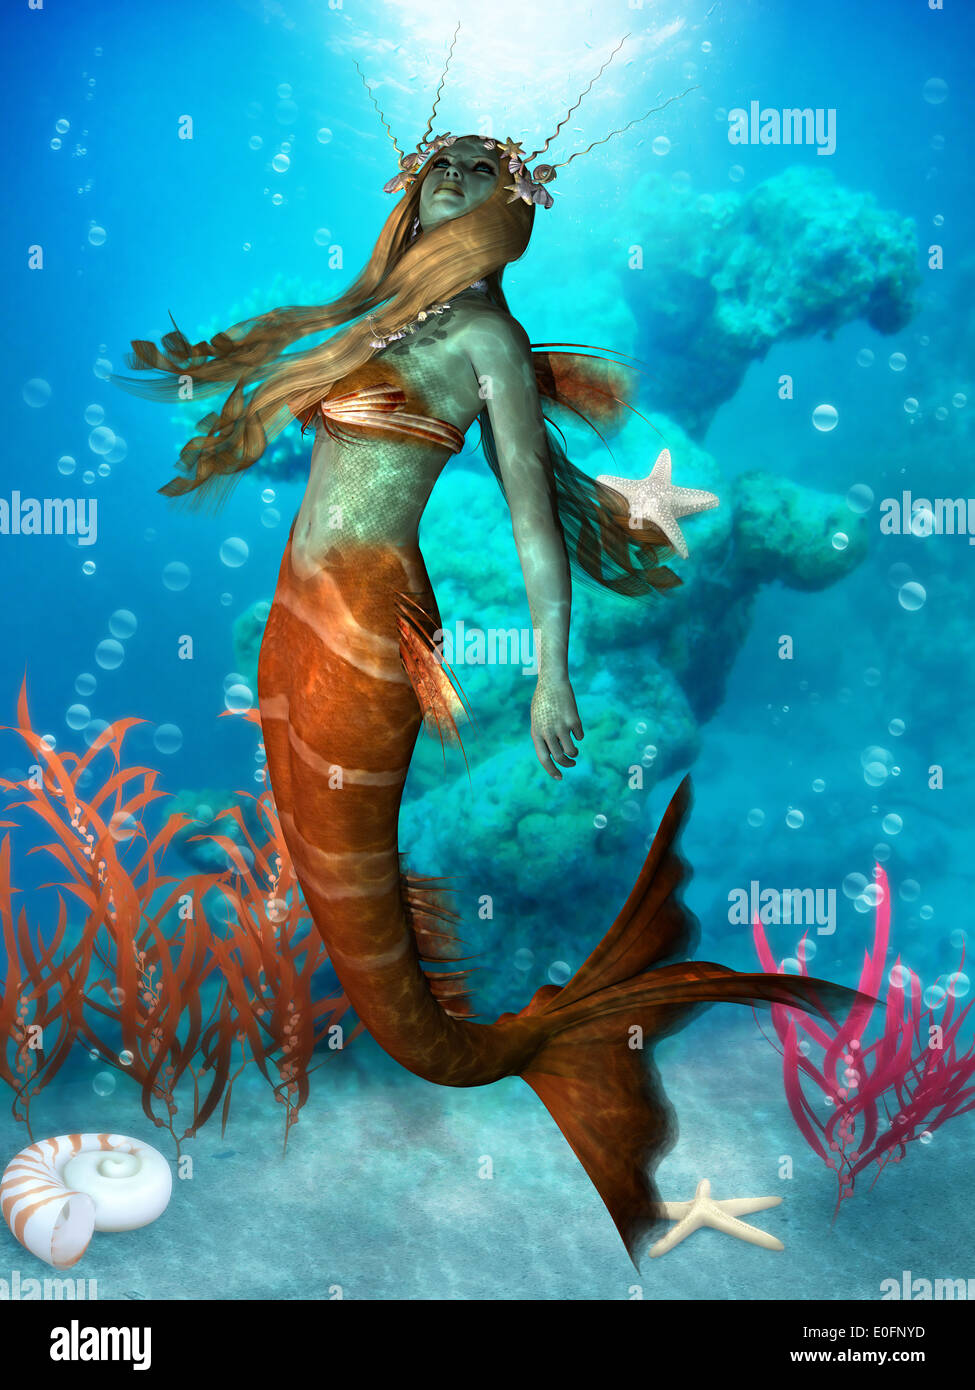 The Mermaid is a legendary aquatic creature with the upper body of a woman and the tail of a fish. Stock Photo